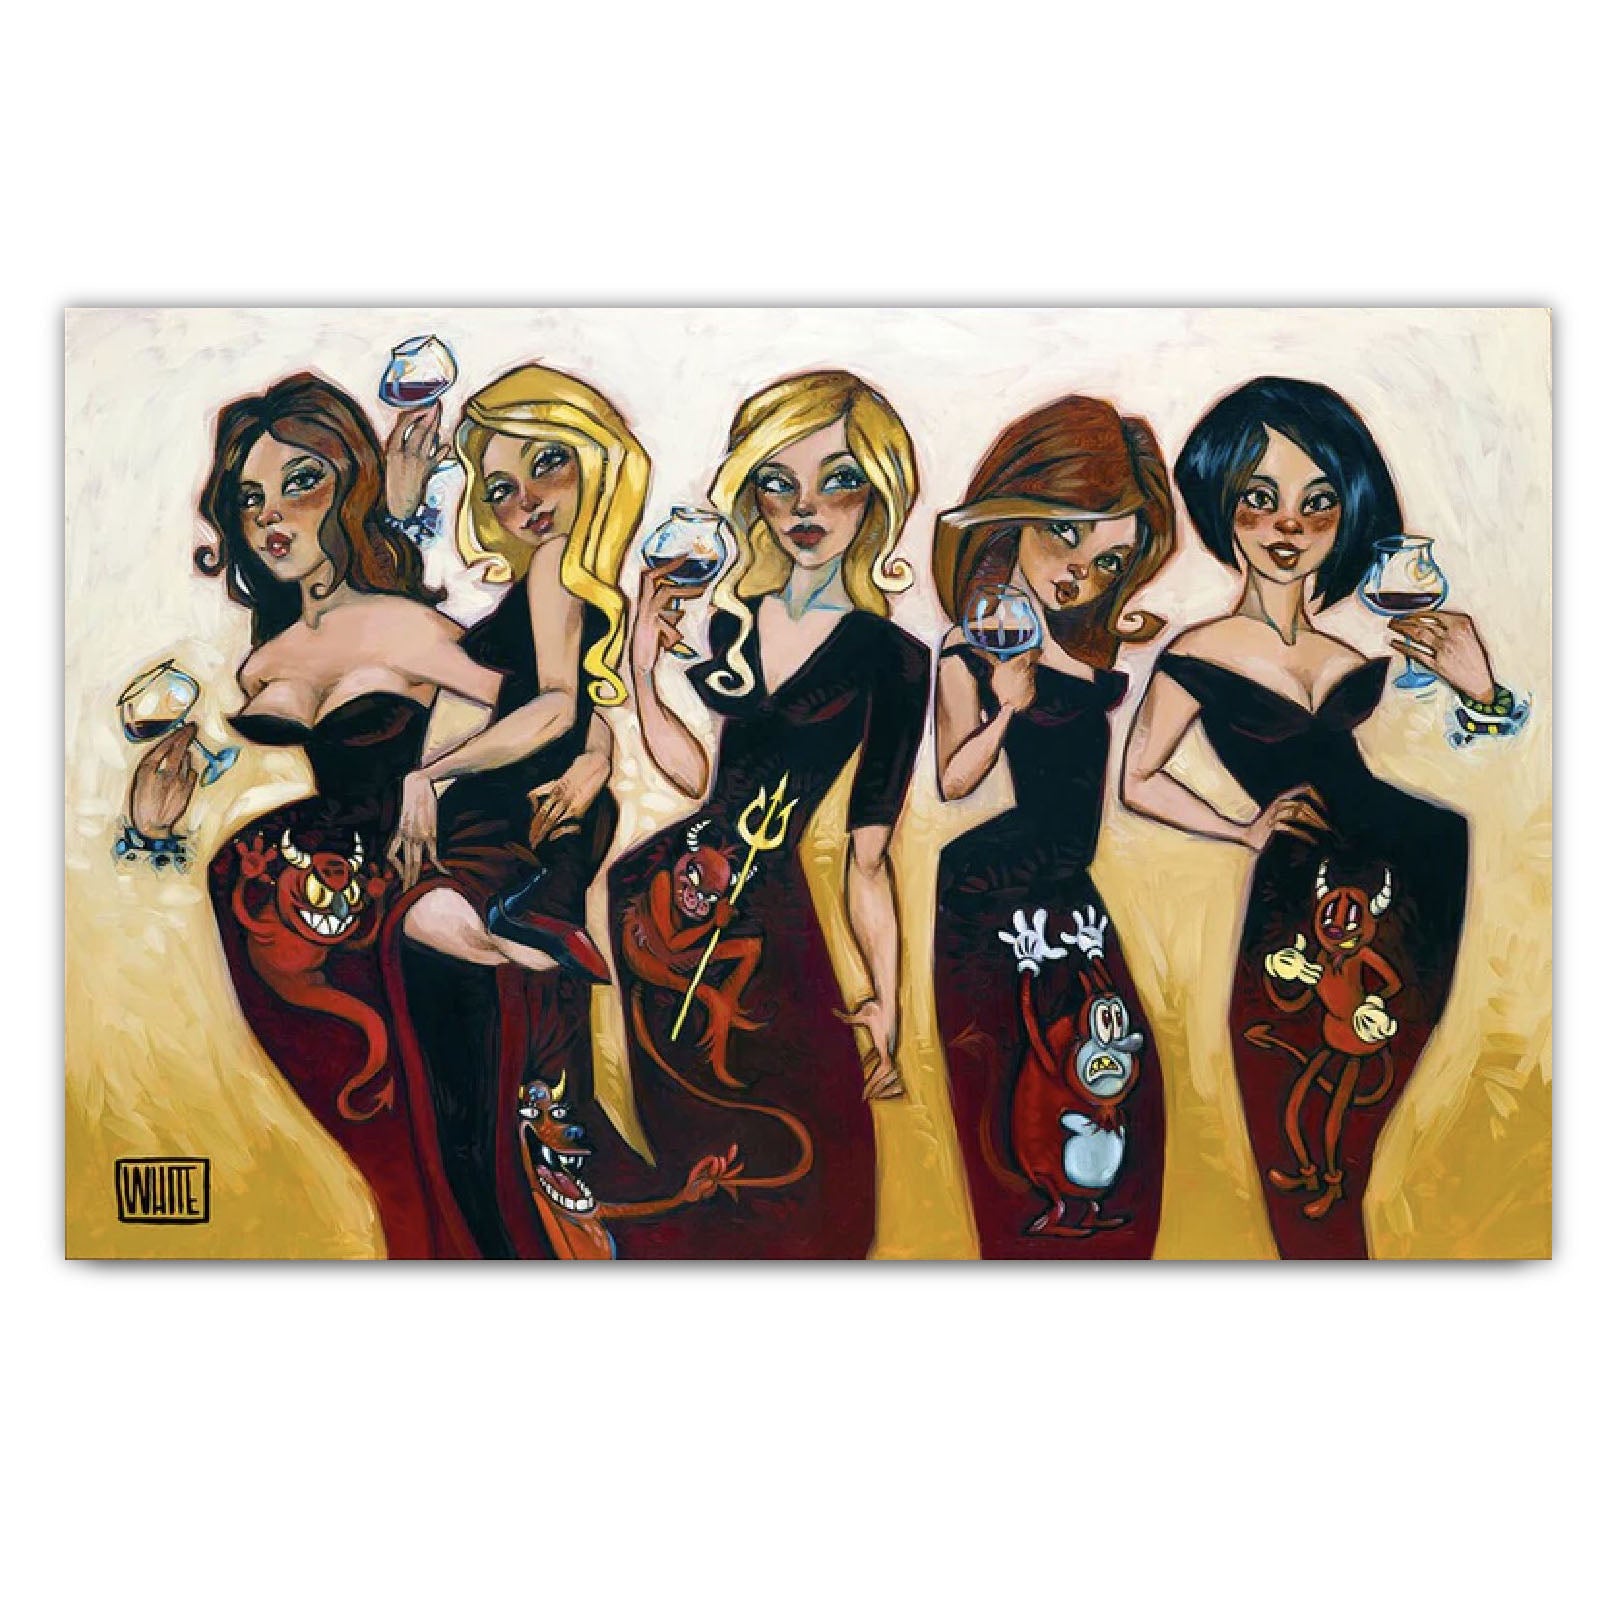 Todd White "Devils in the Wine" Limited Edition Canvas On Board